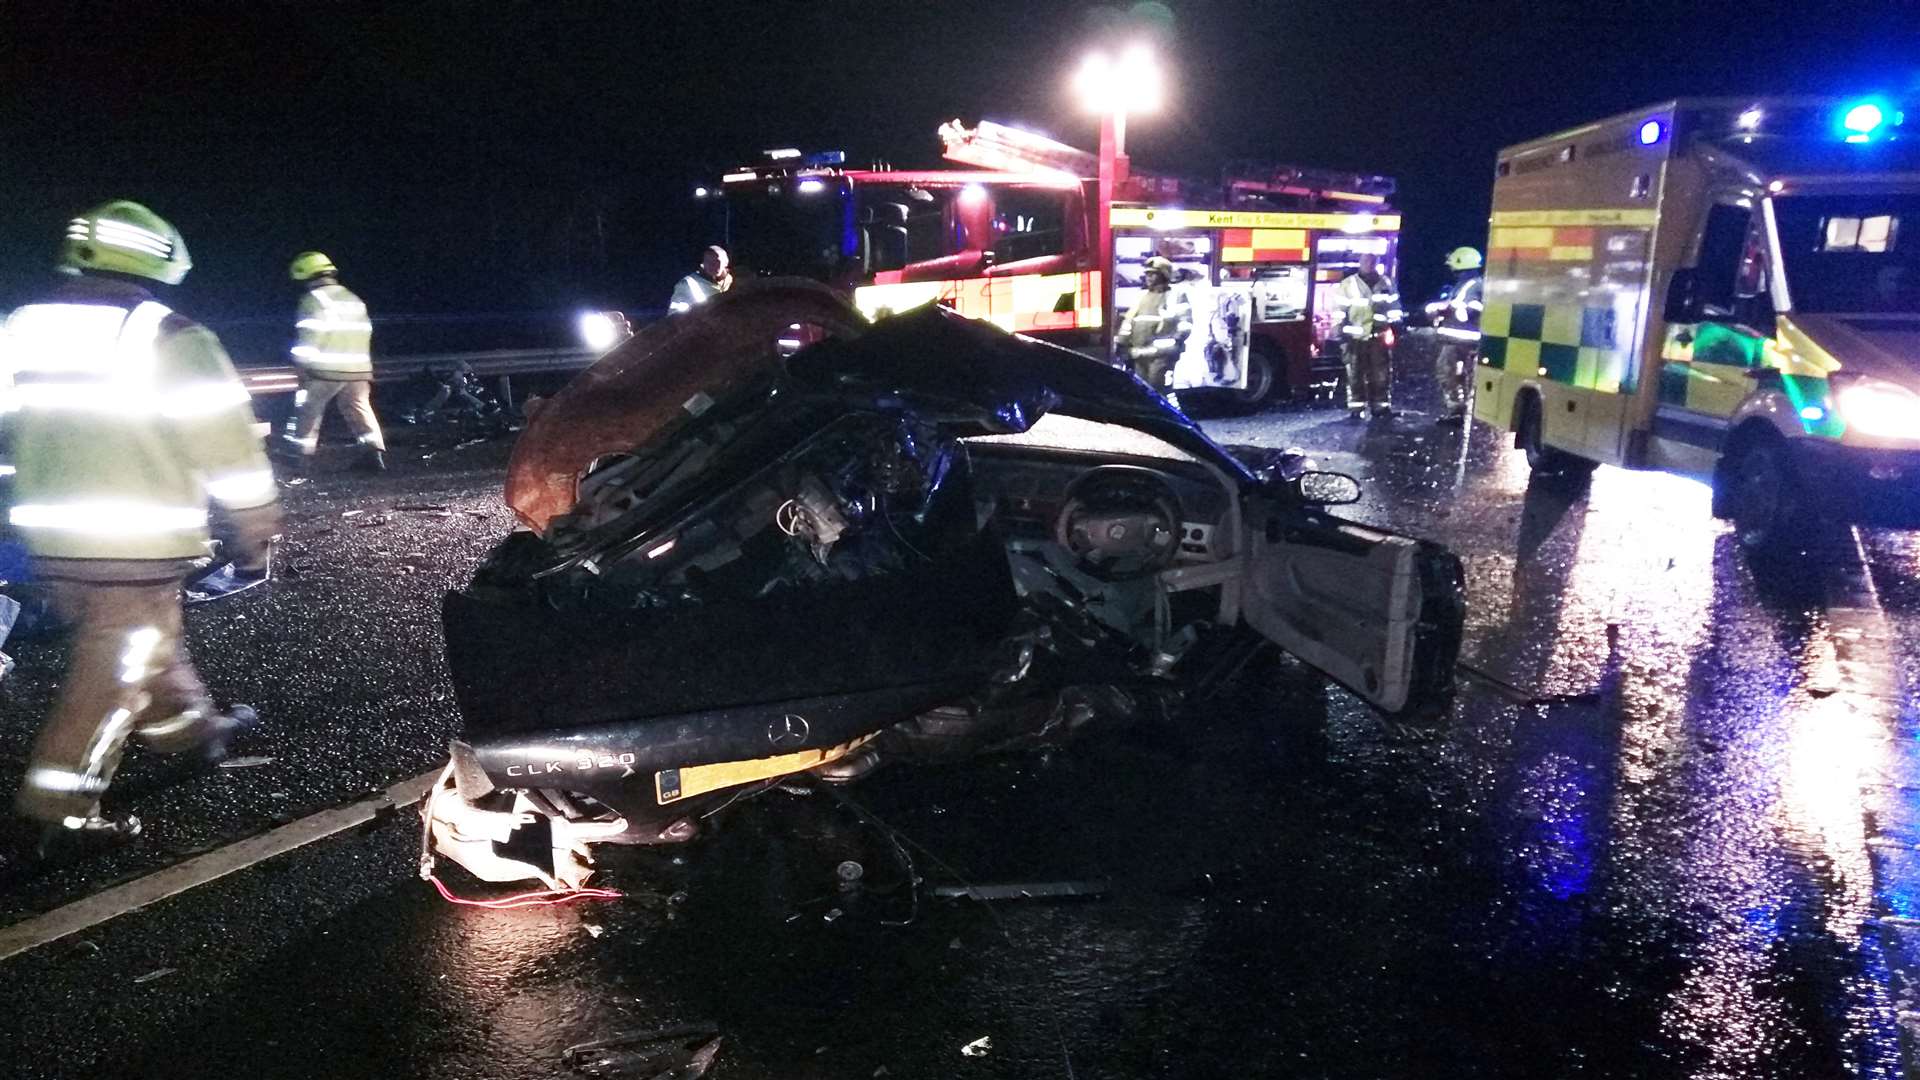 The Boxing Day crash scene. Image: Kent Fire and Rescue Service